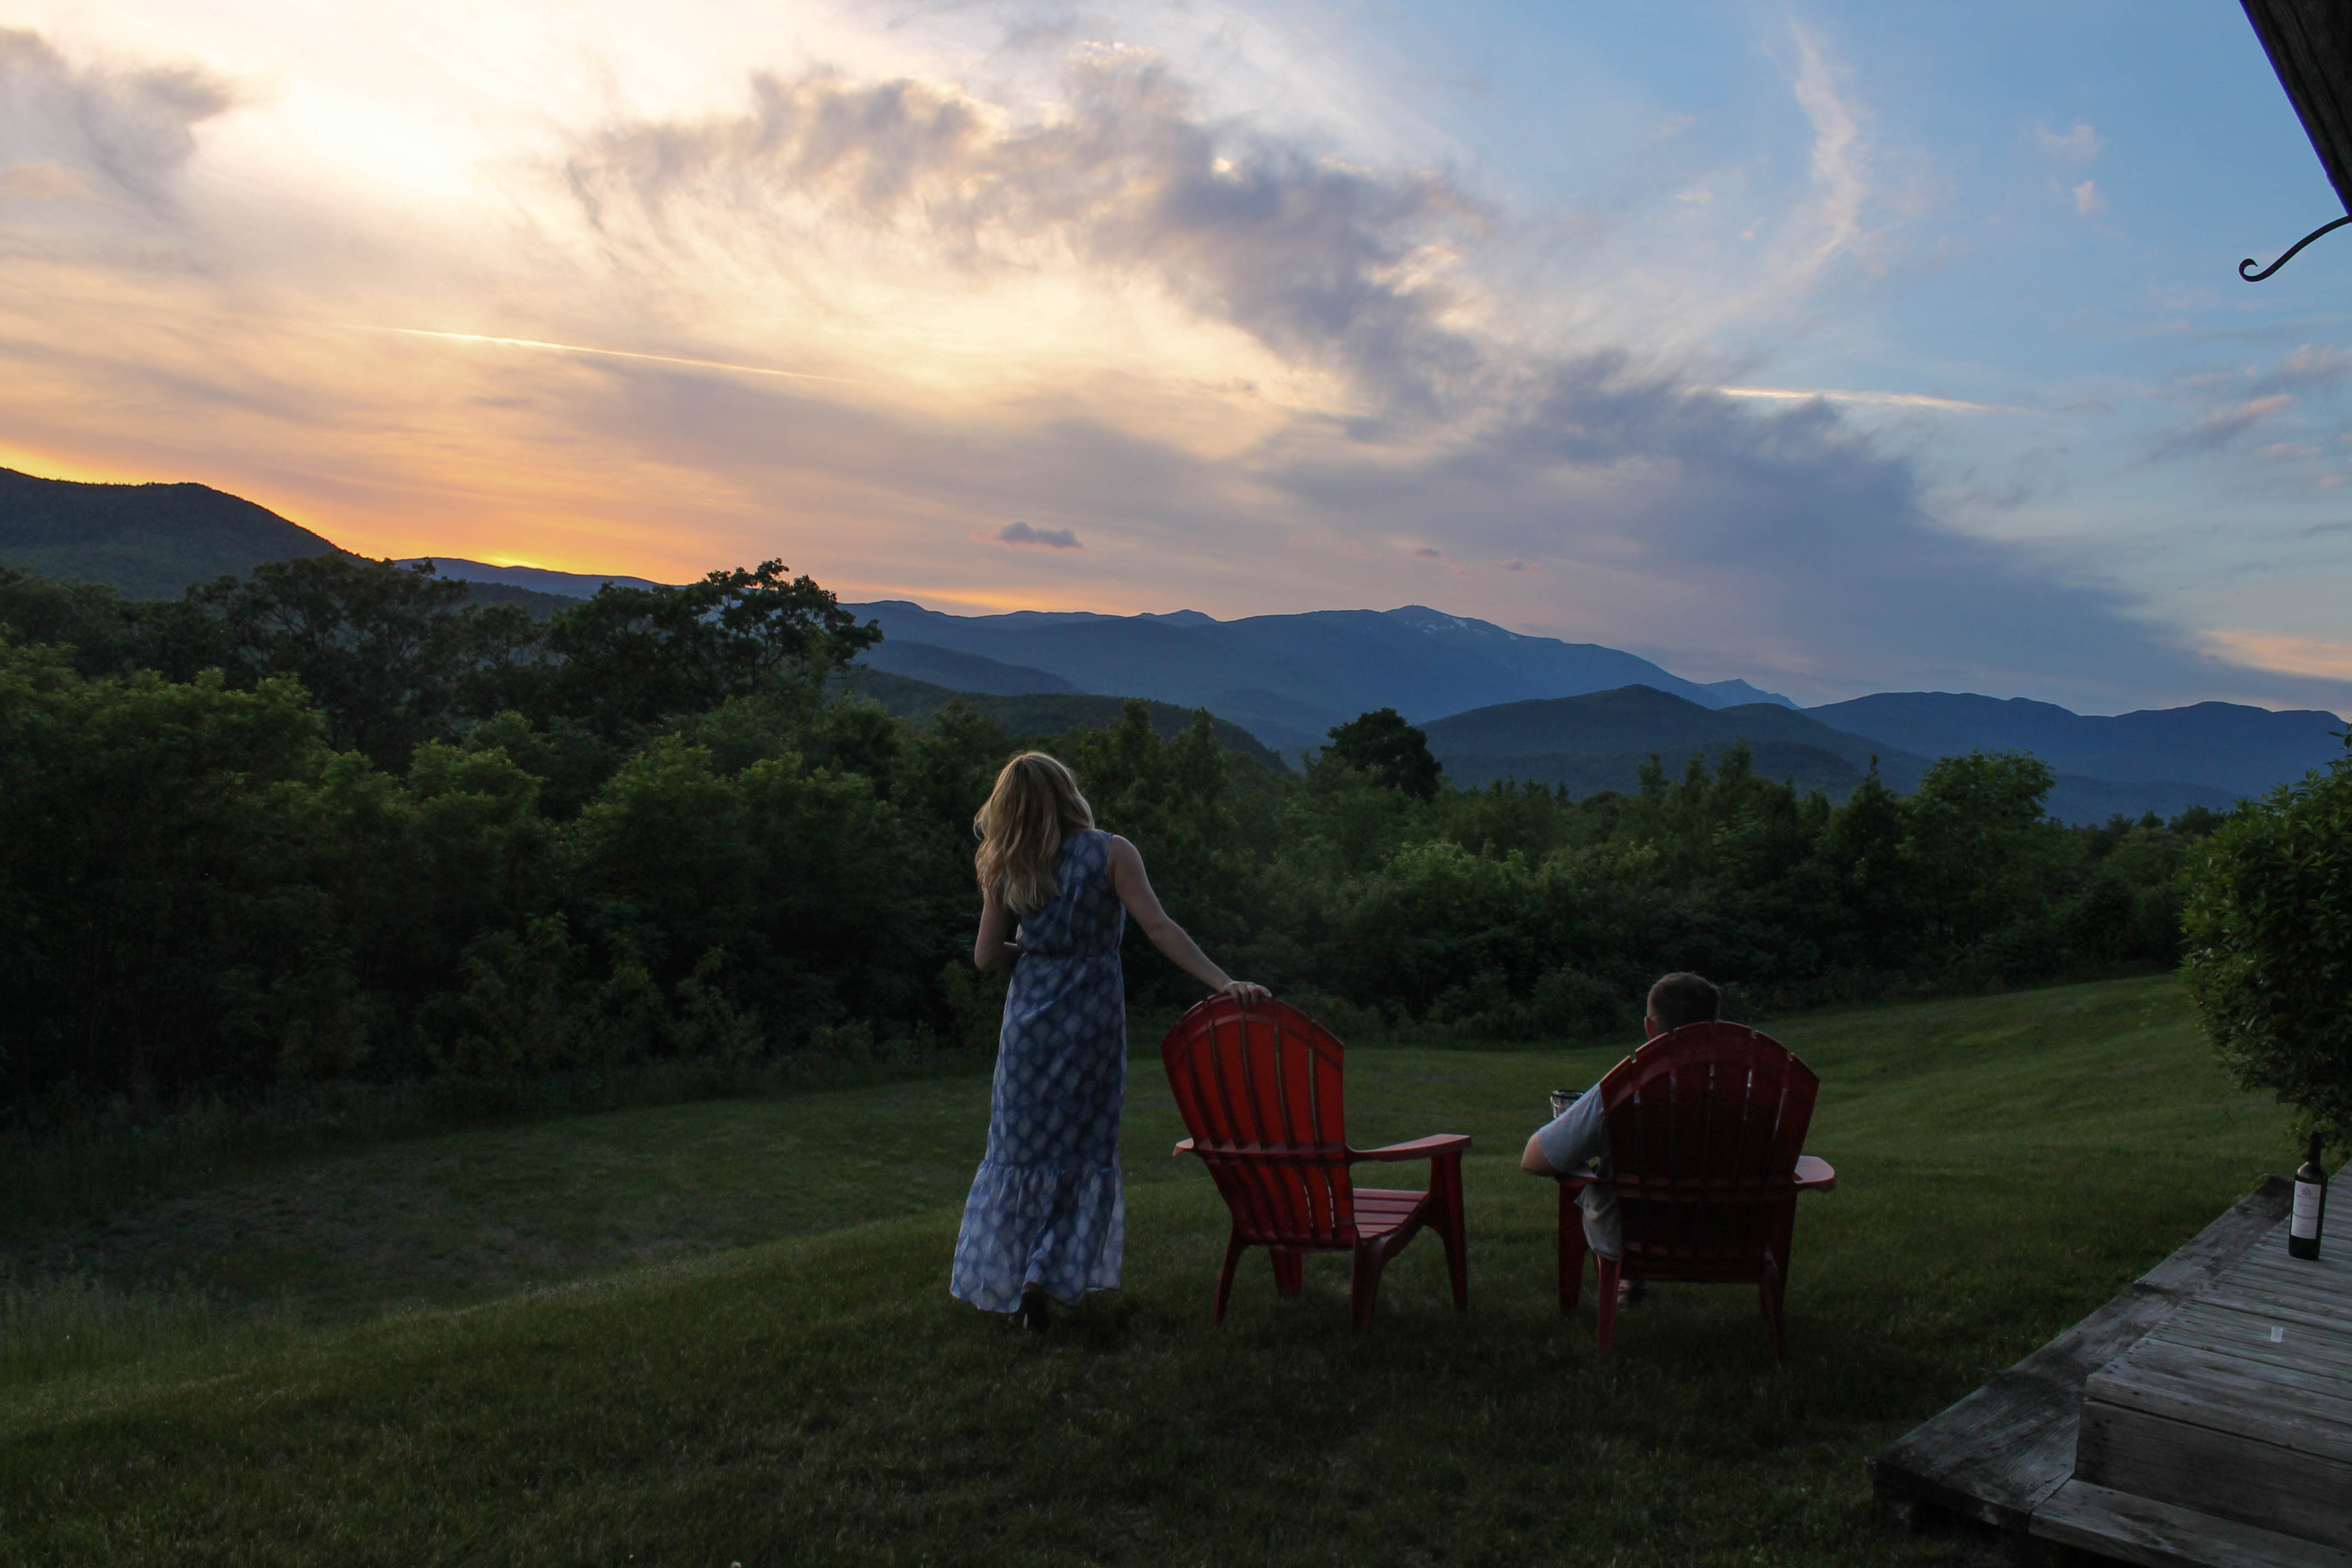 Magical sunset in the White Mountains, New Hampshire | ourlittlehomestyle.com